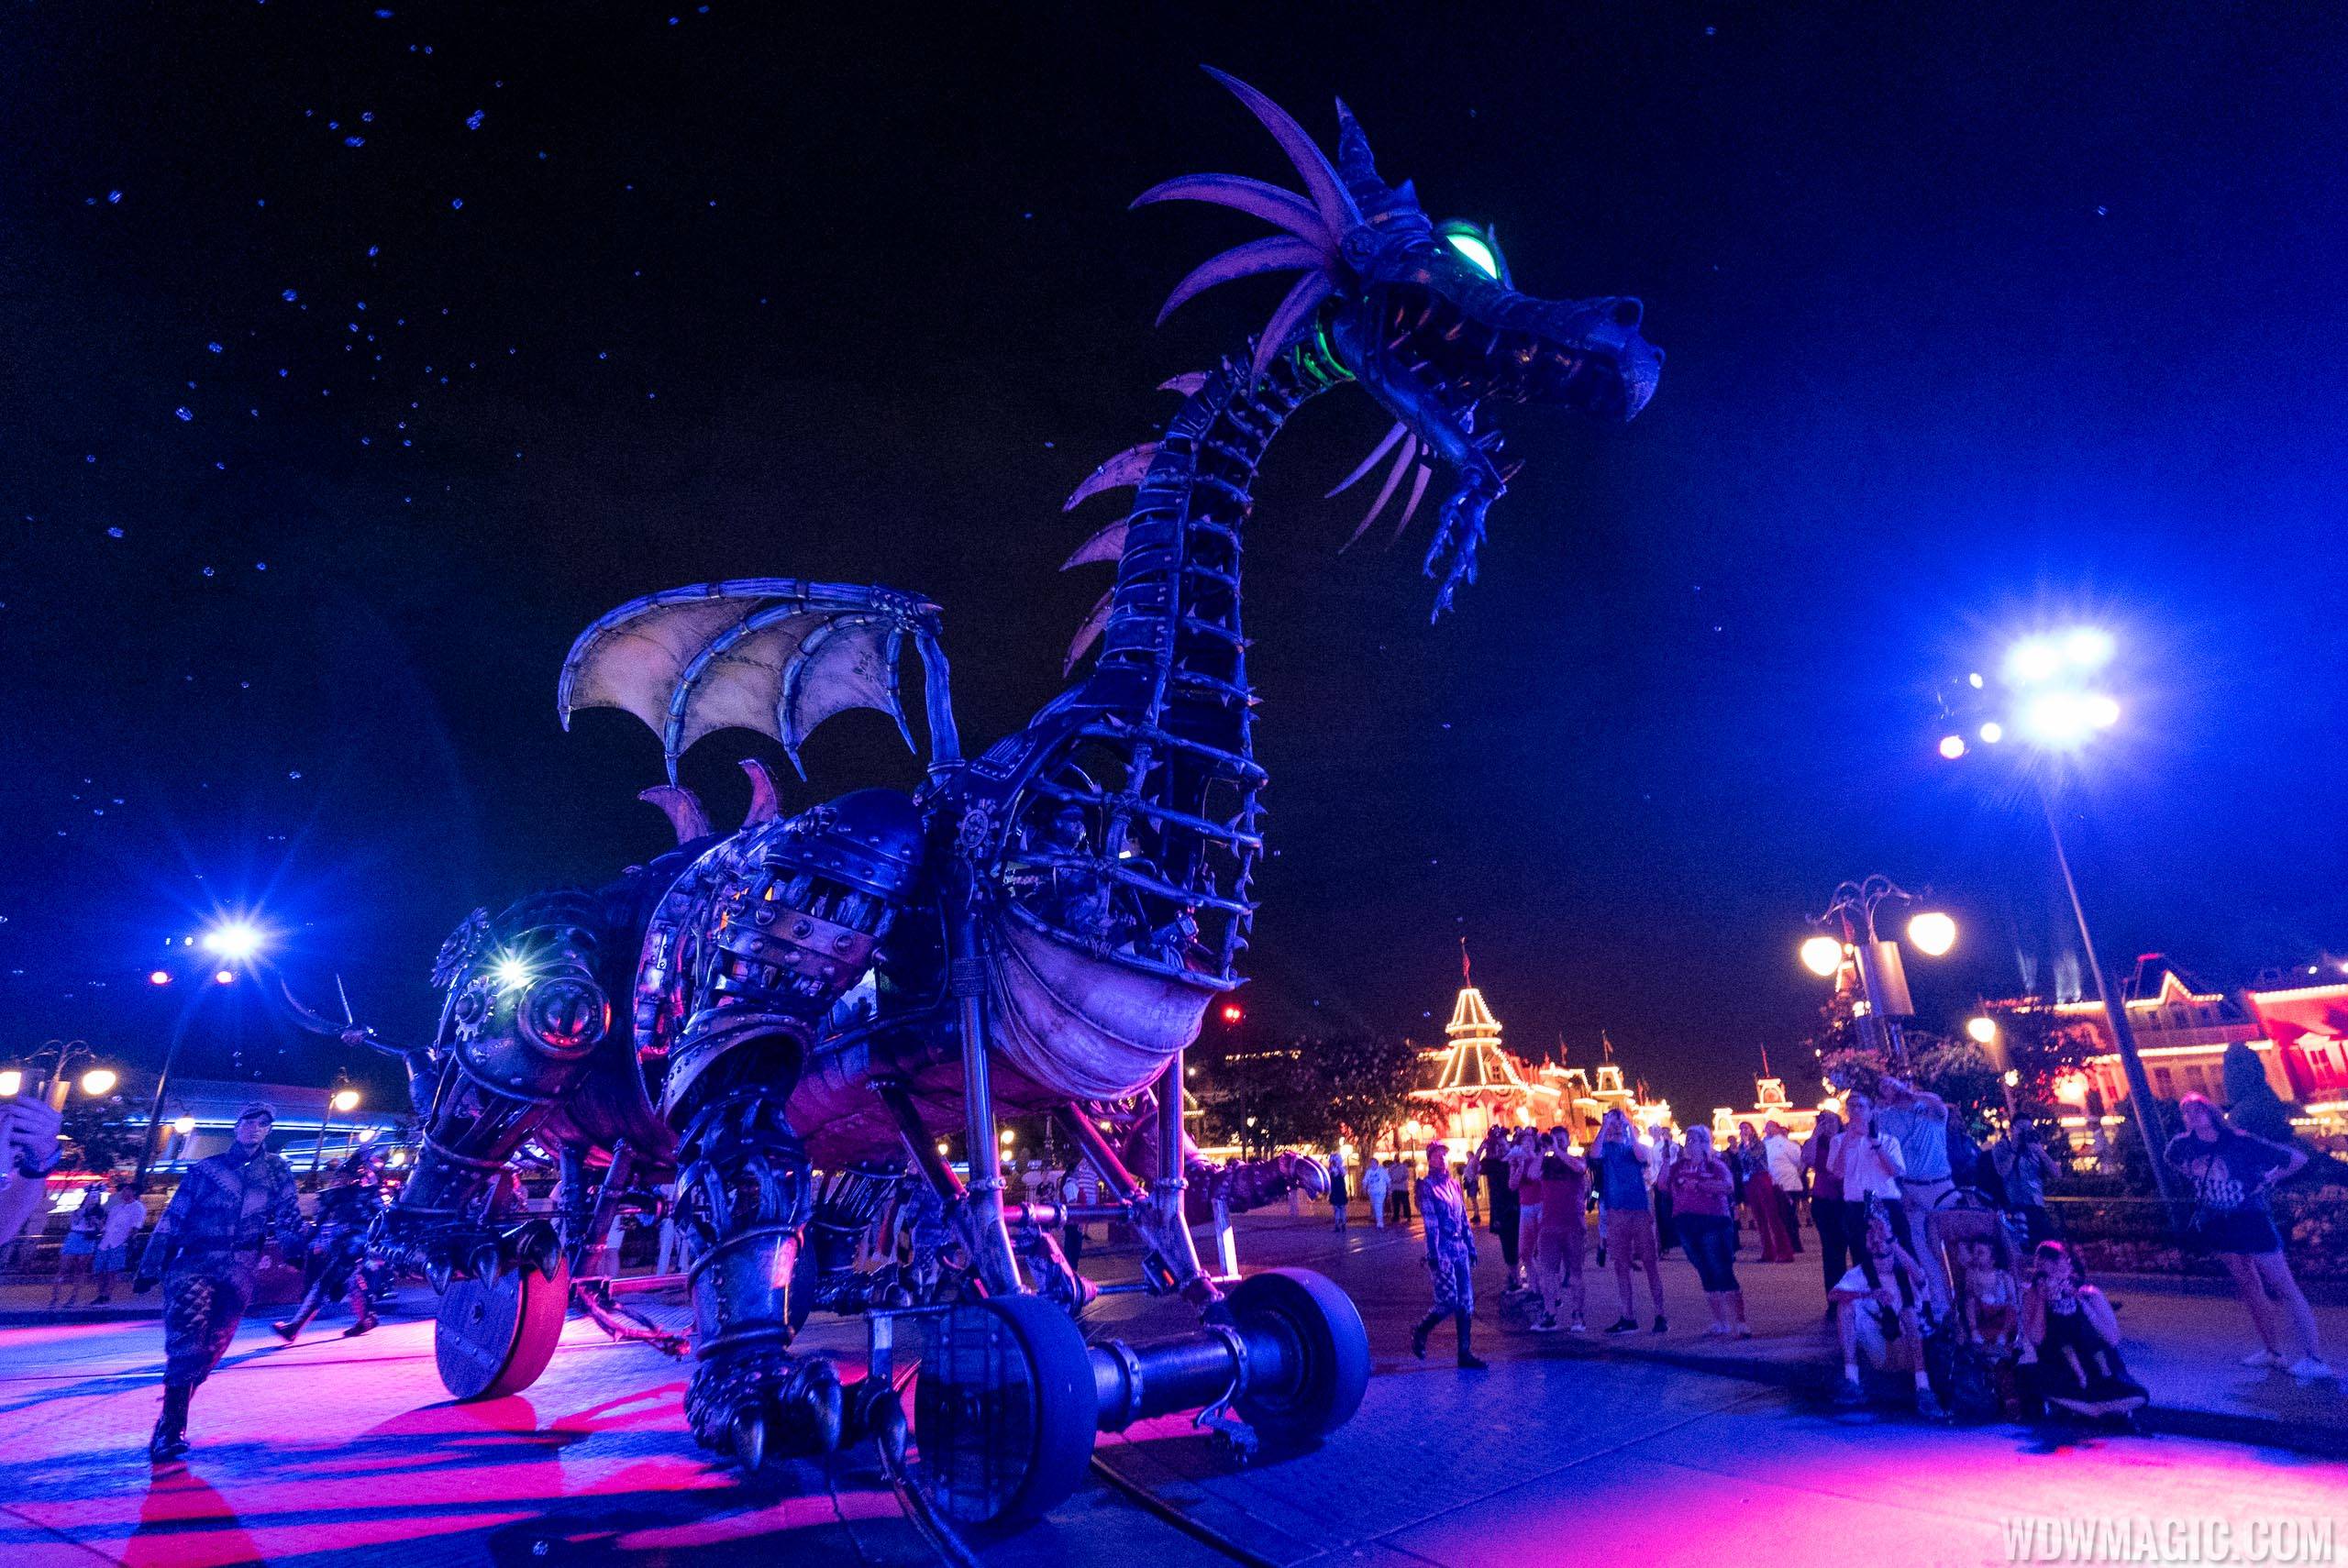 Villains' Cursed Caravan joining Maleficent at Disney Villains After Hours in 2020